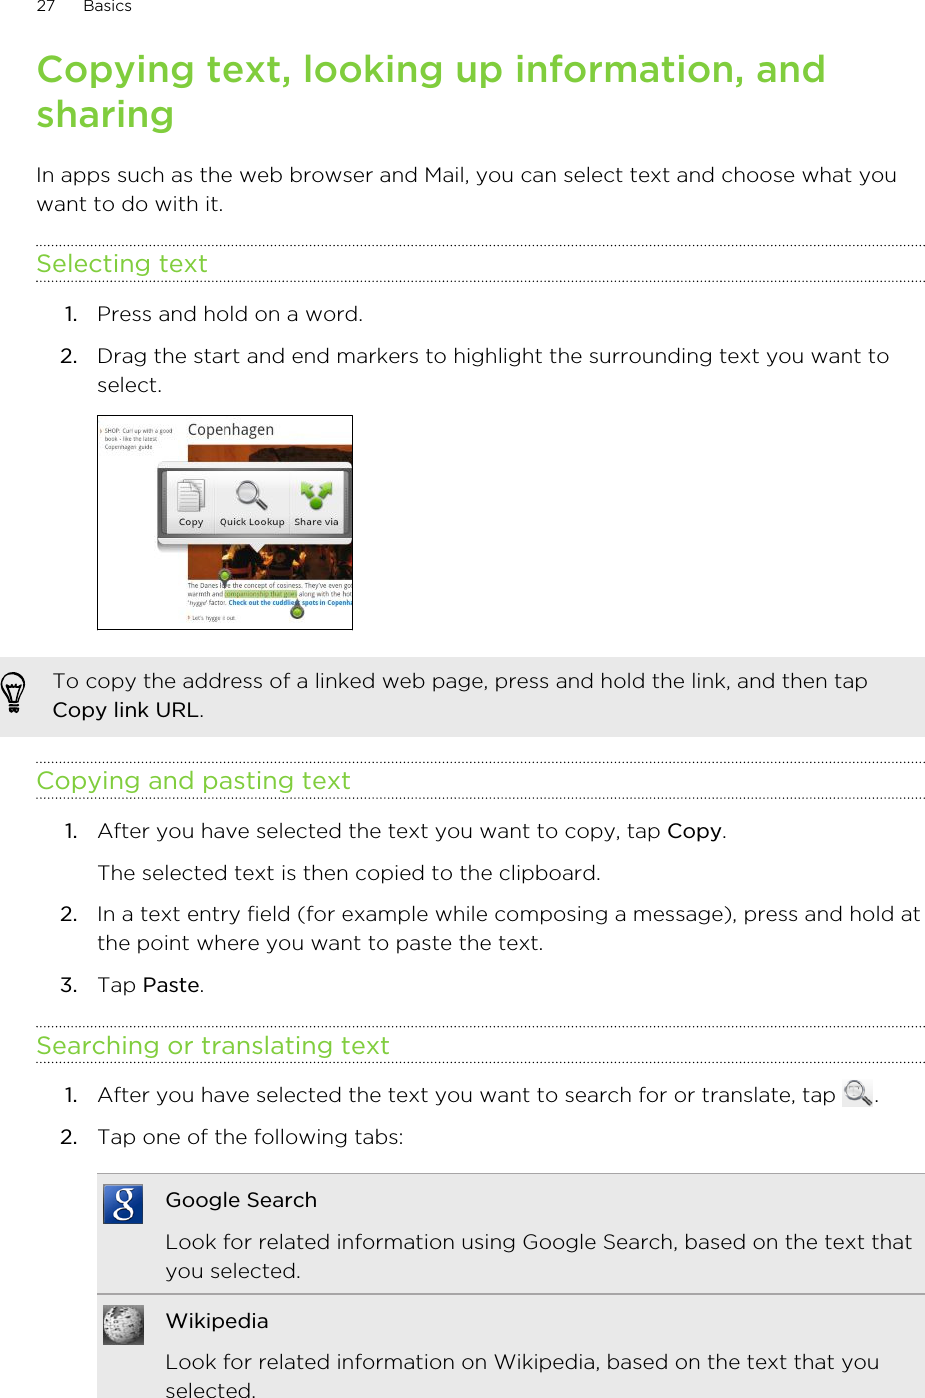 Copying text, looking up information, andsharingIn apps such as the web browser and Mail, you can select text and choose what youwant to do with it.Selecting text1. Press and hold on a word.2. Drag the start and end markers to highlight the surrounding text you want toselect. To copy the address of a linked web page, press and hold the link, and then tapCopy link URL.Copying and pasting text1. After you have selected the text you want to copy, tap Copy. The selected text is then copied to the clipboard.2. In a text entry field (for example while composing a message), press and hold atthe point where you want to paste the text.3. Tap Paste.Searching or translating text1. After you have selected the text you want to search for or translate, tap  .2. Tap one of the following tabs:Google SearchLook for related information using Google Search, based on the text thatyou selected.WikipediaLook for related information on Wikipedia, based on the text that youselected.27 Basics